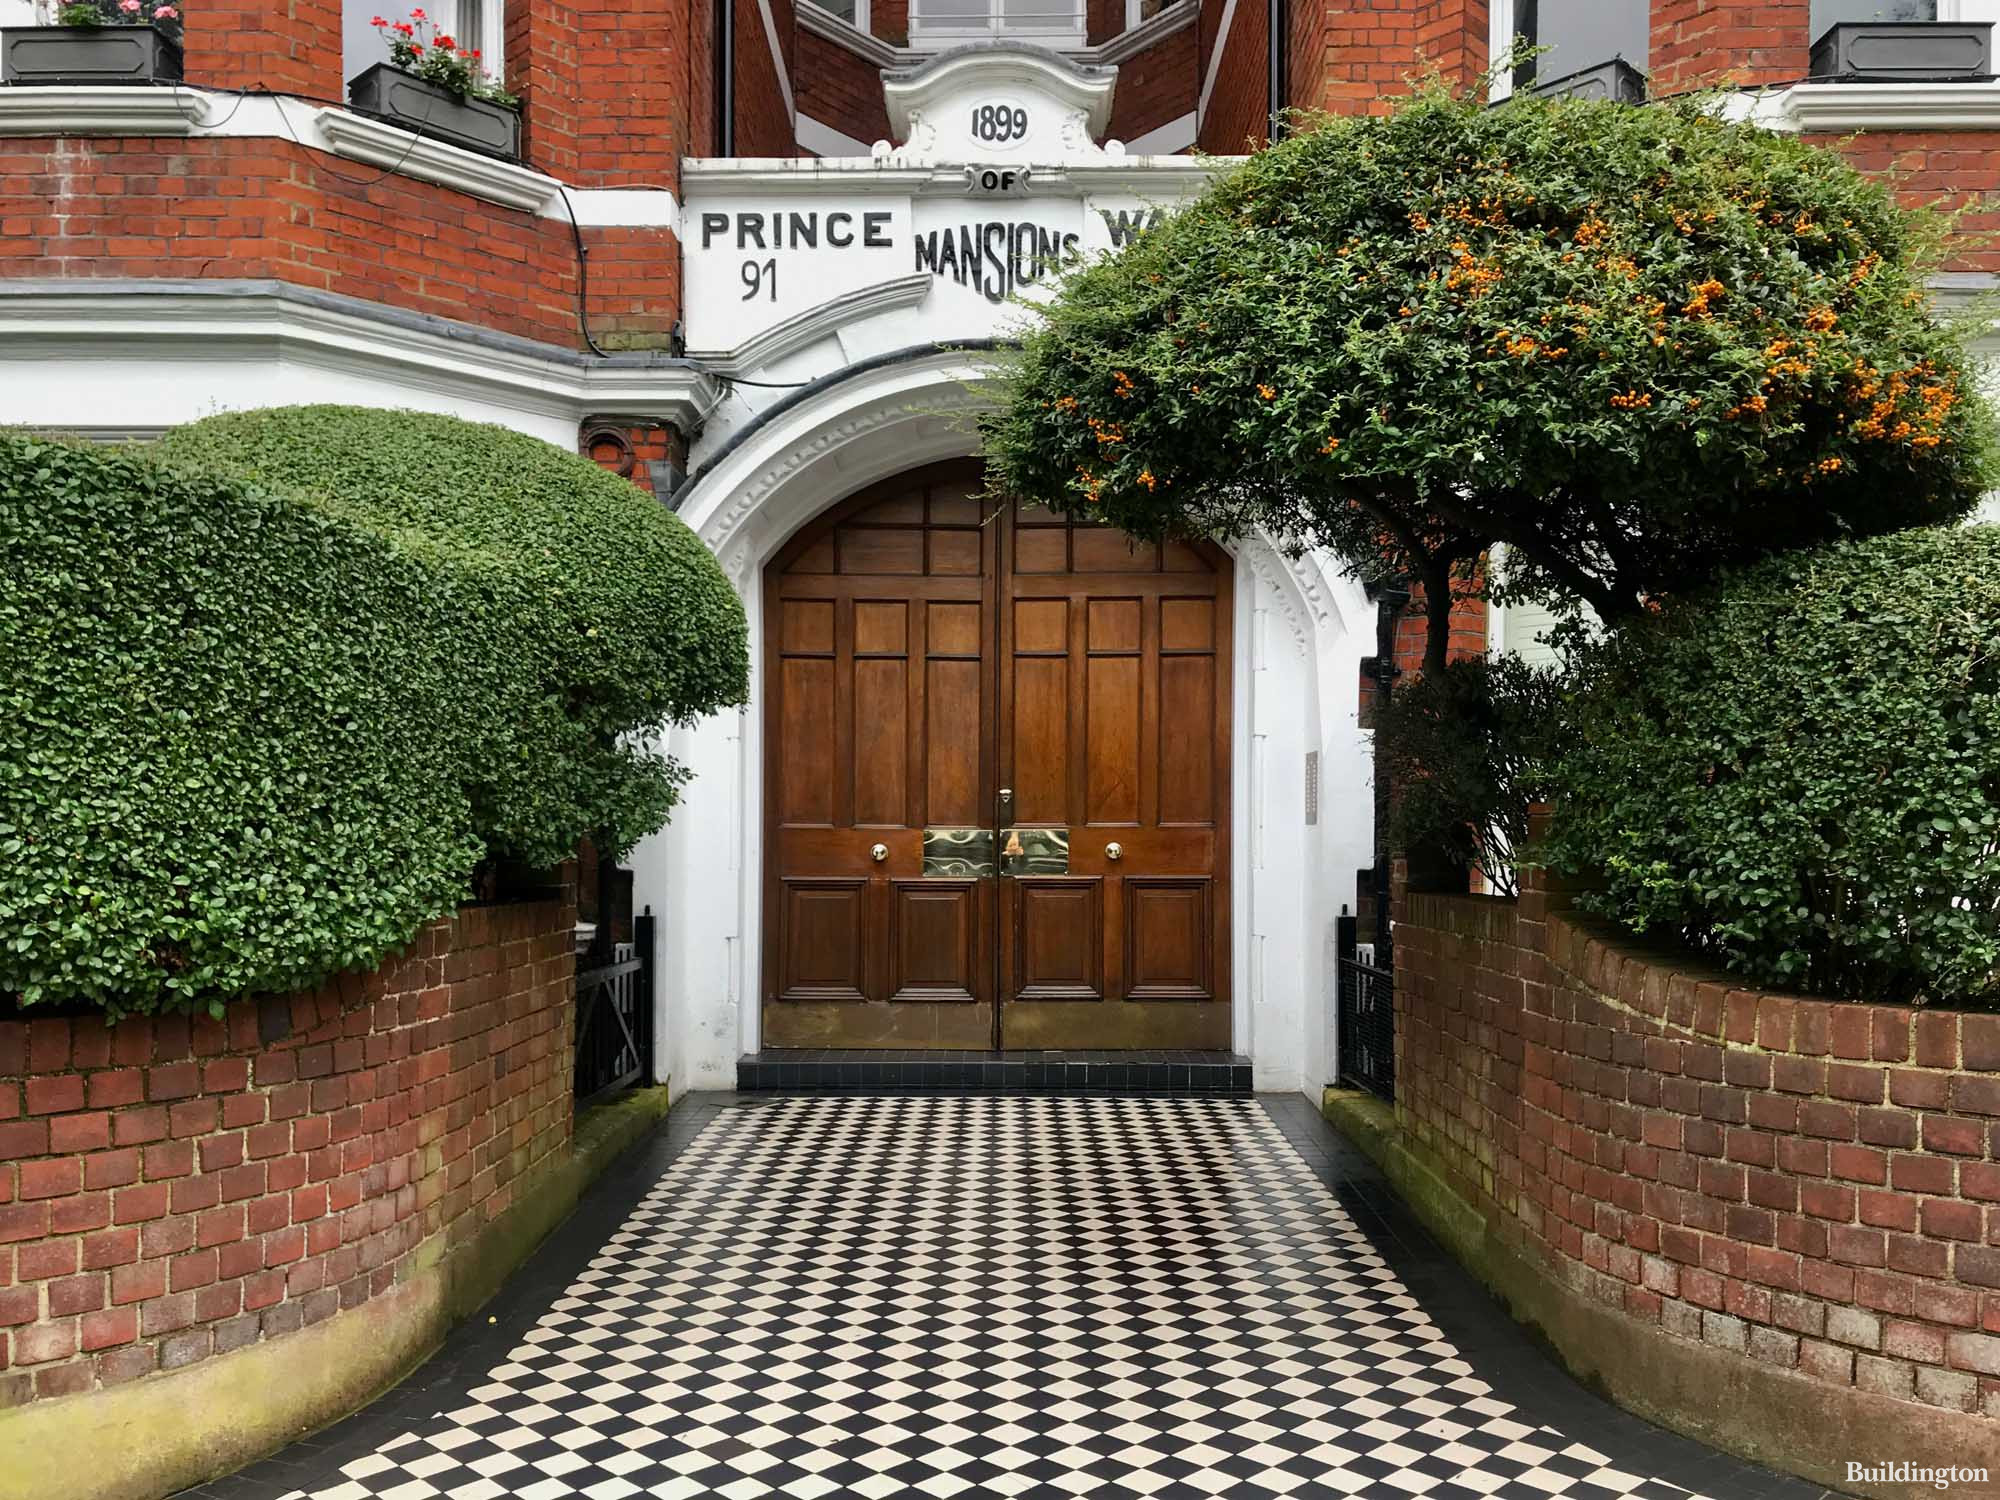 Prince of Wales Mansions entrance to flats No. 91-... on Prince of Wales Drive opposite Battersea Park in London SW11.